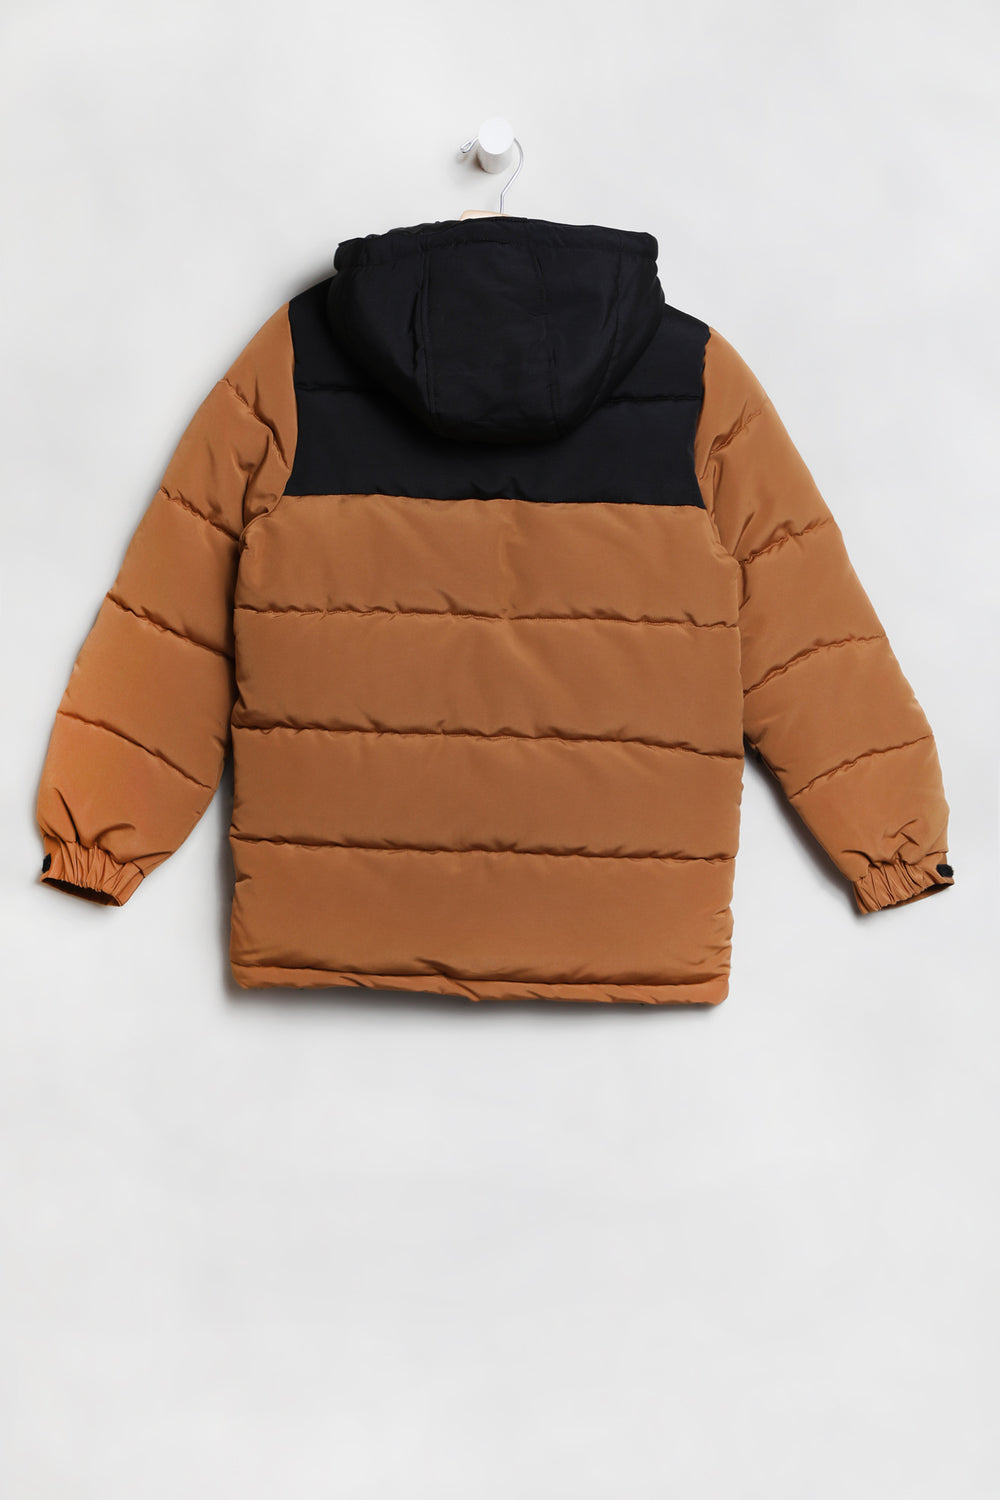 Zoo York Youth Colour Block Puffer Jacket Zoo York Youth Colour Block Puffer Jacket